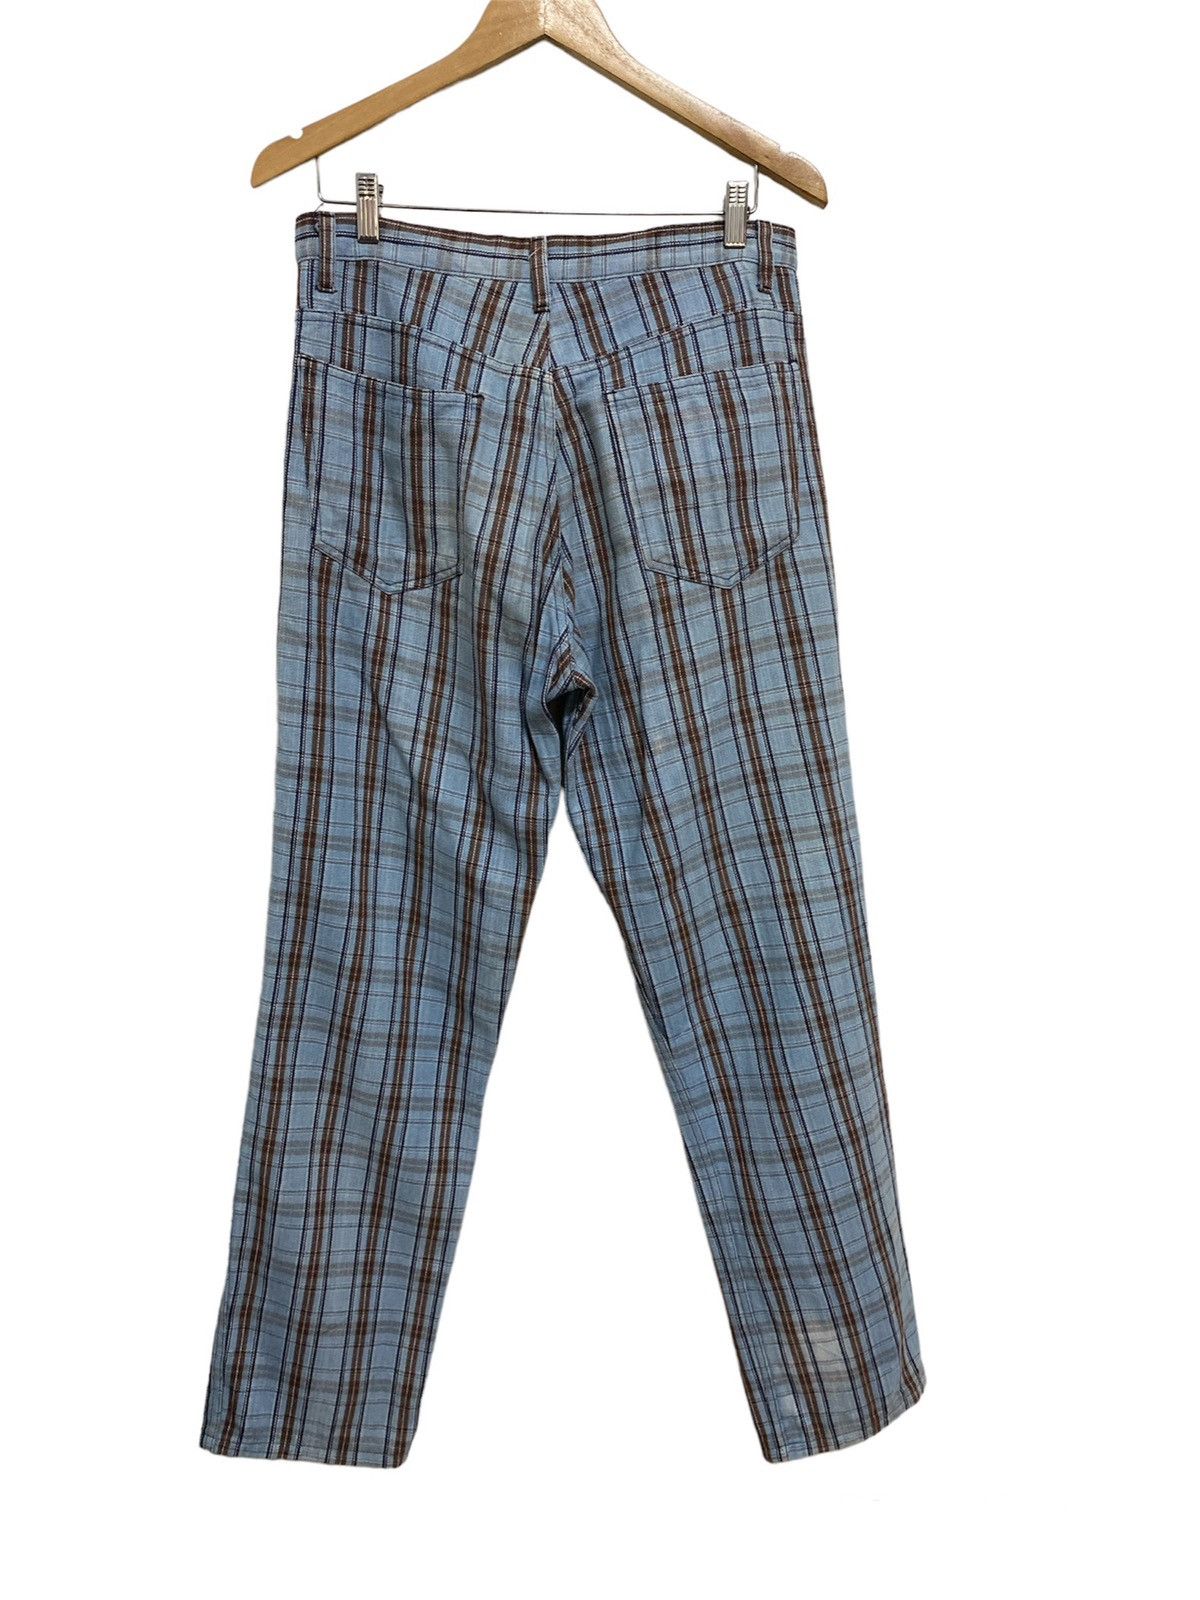 Nepenthes New York - Nepenthes Checkered Jeans - 7